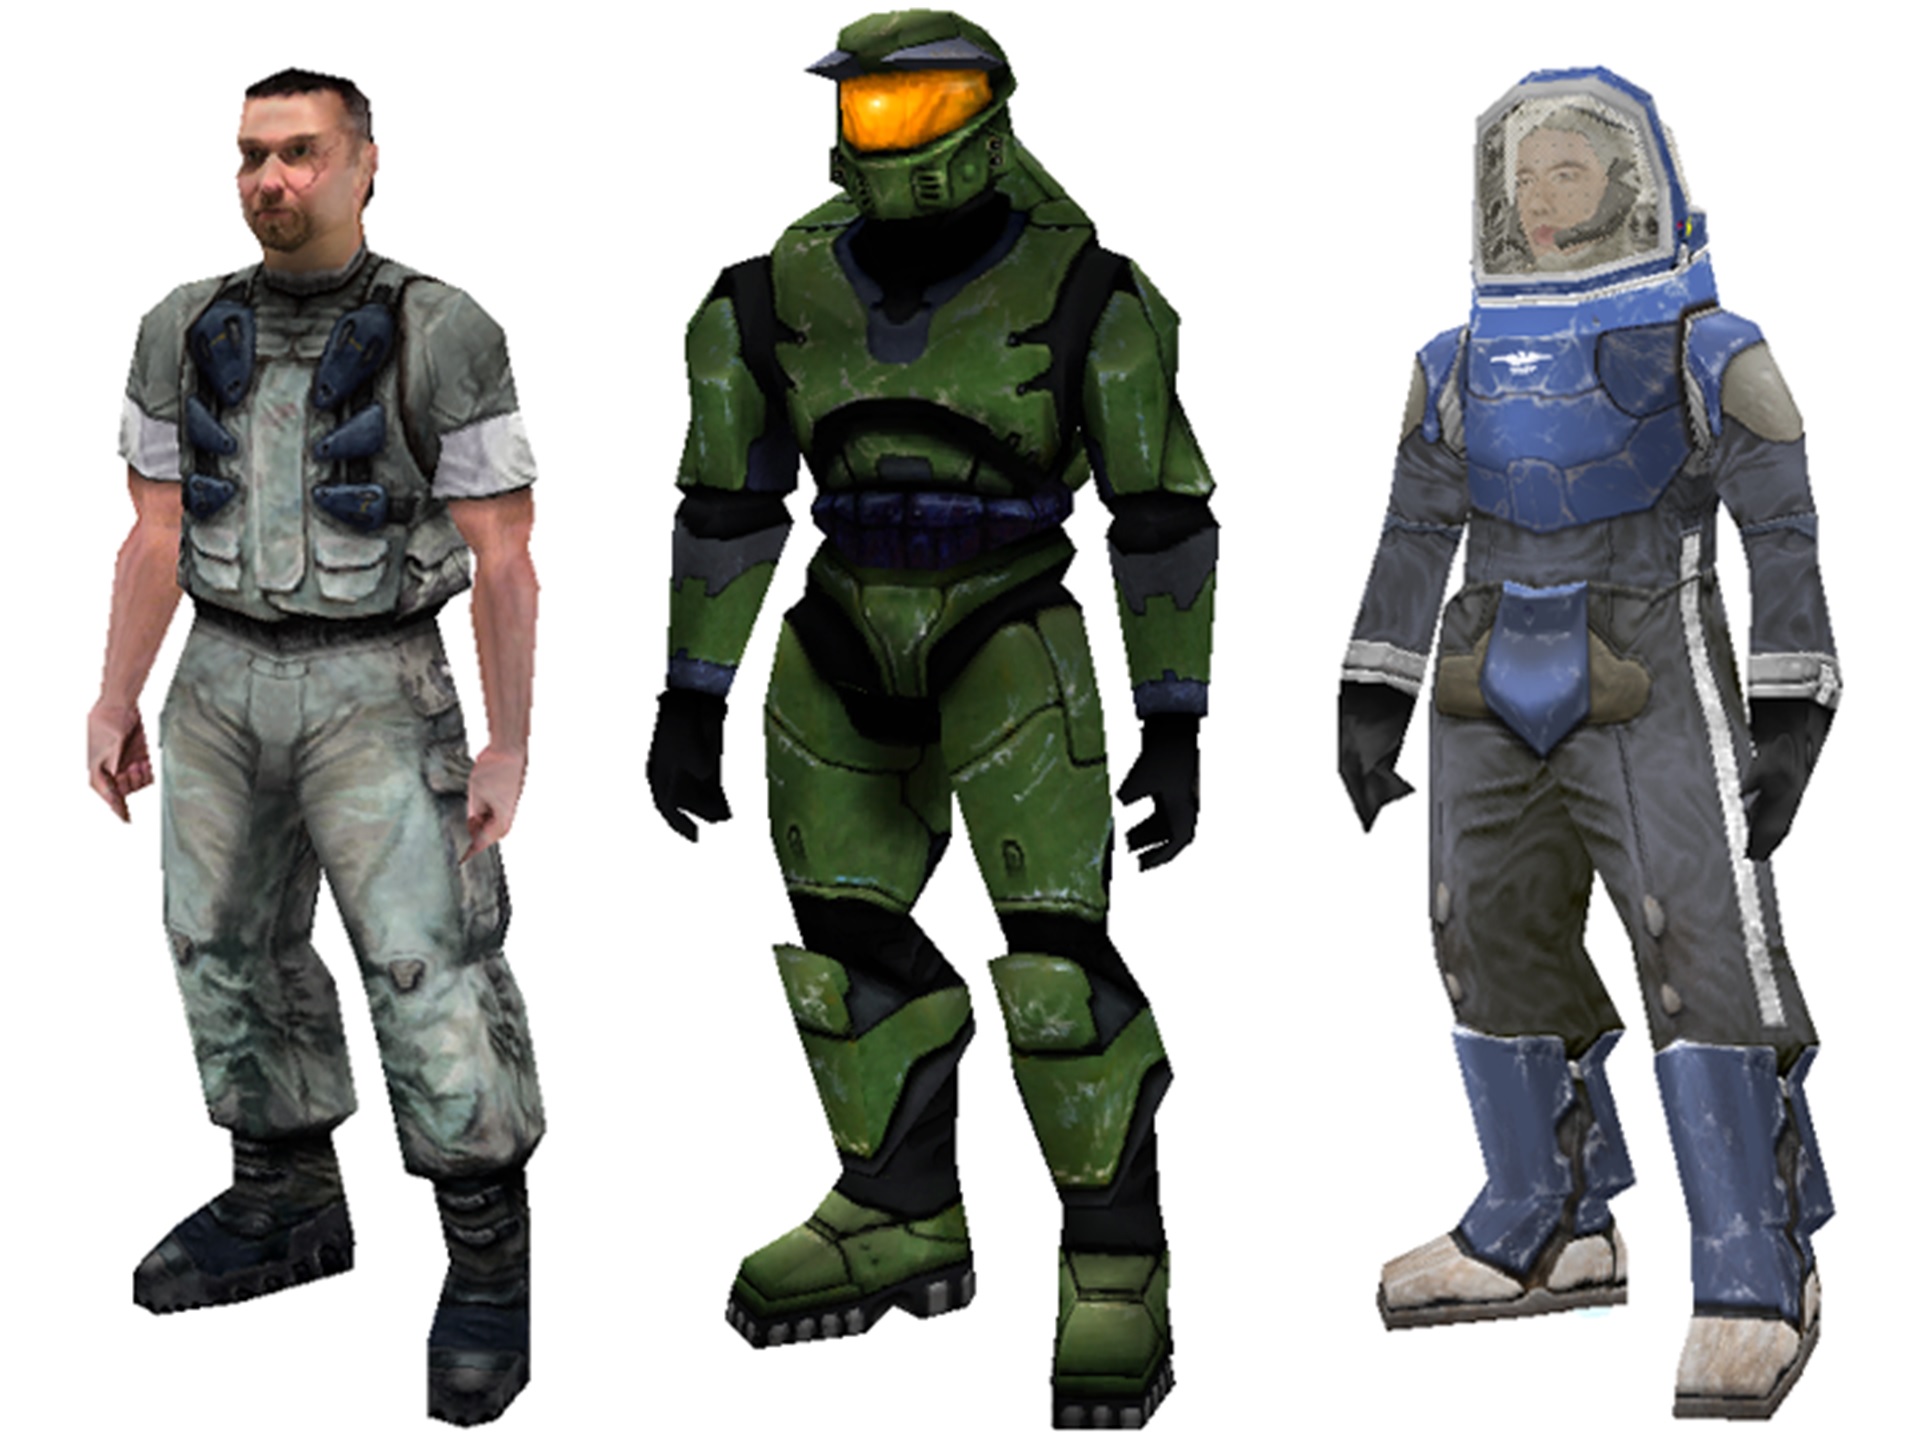 Halo CE Marine, Spartan, and cut spacesuit character models